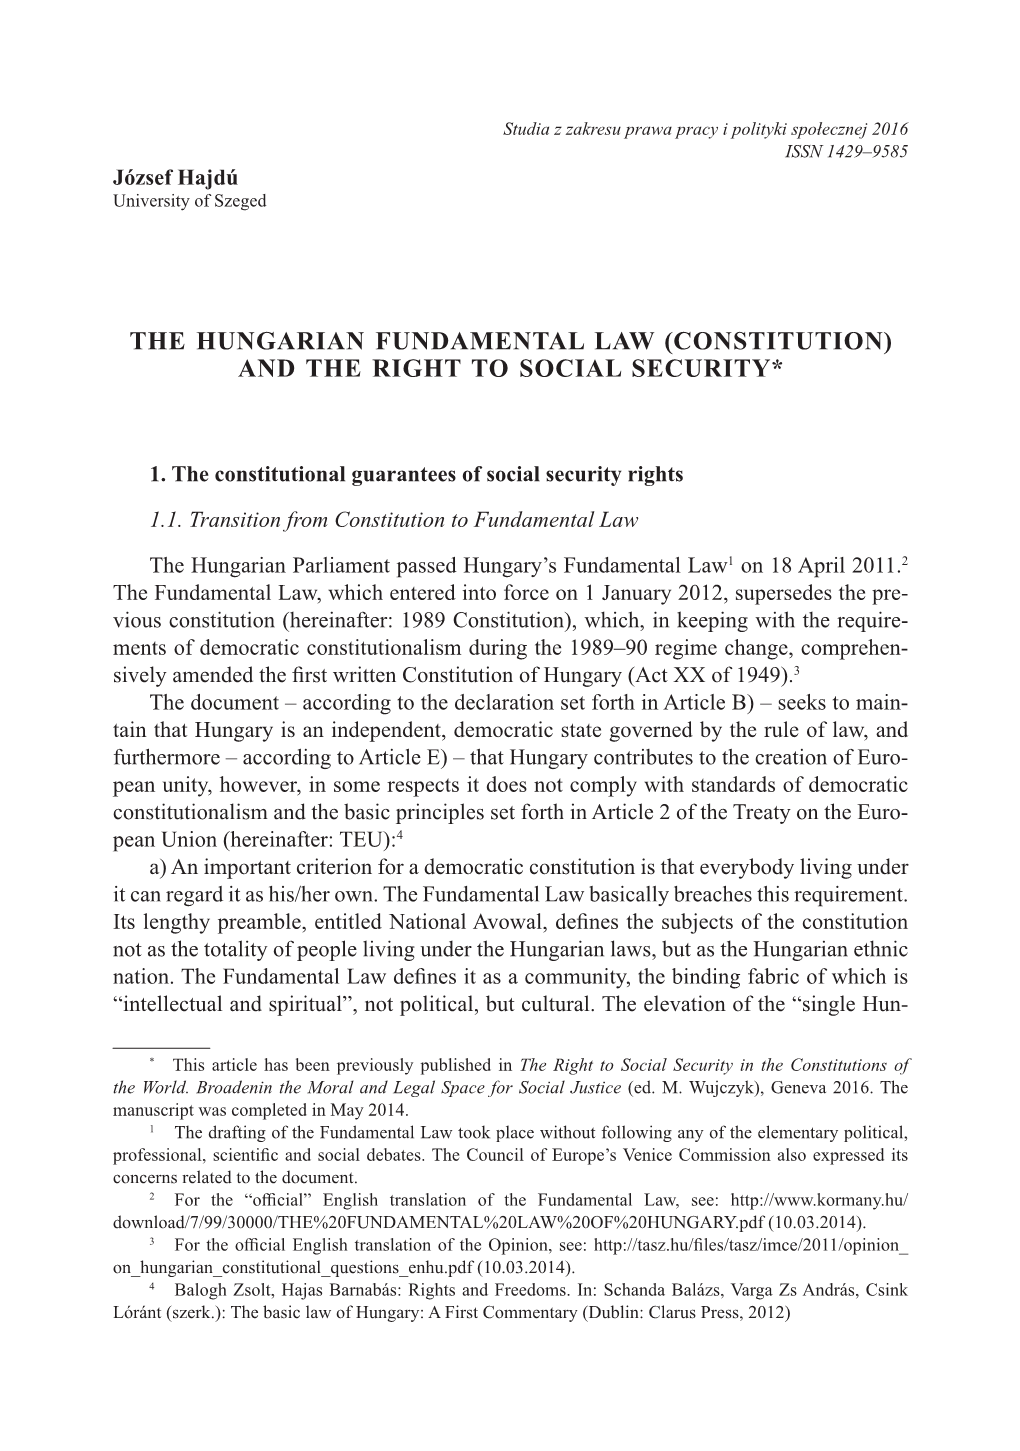 The Hungarian Fundamental Law (Constitution) and the Right to Social Security*